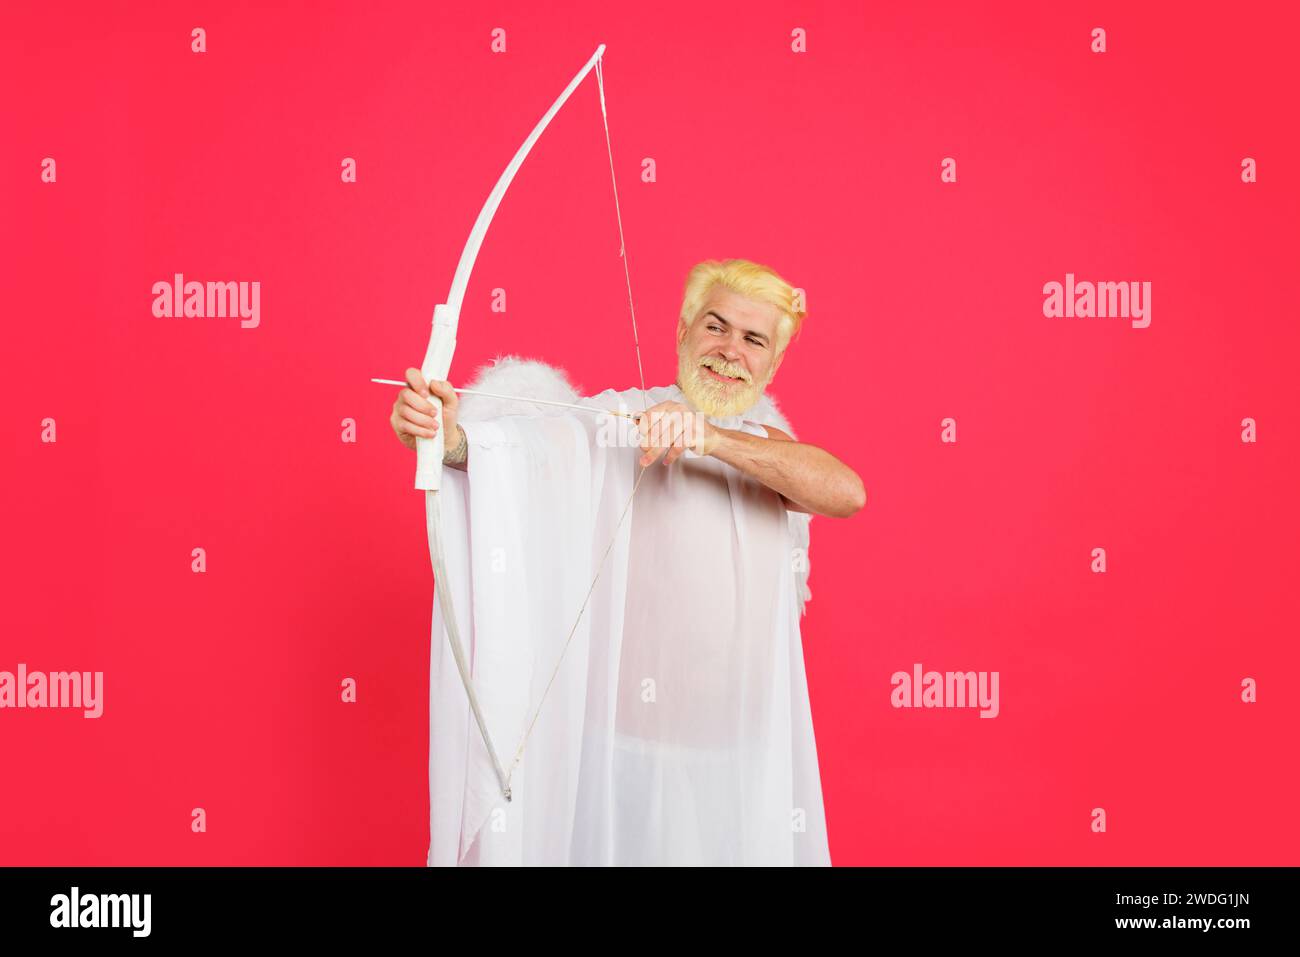 Valentines Day. Valentine cupid in angel wings aiming with bow. Amour. God of love. Smiling bearded man in angel costume with bow and arrow Stock Photo